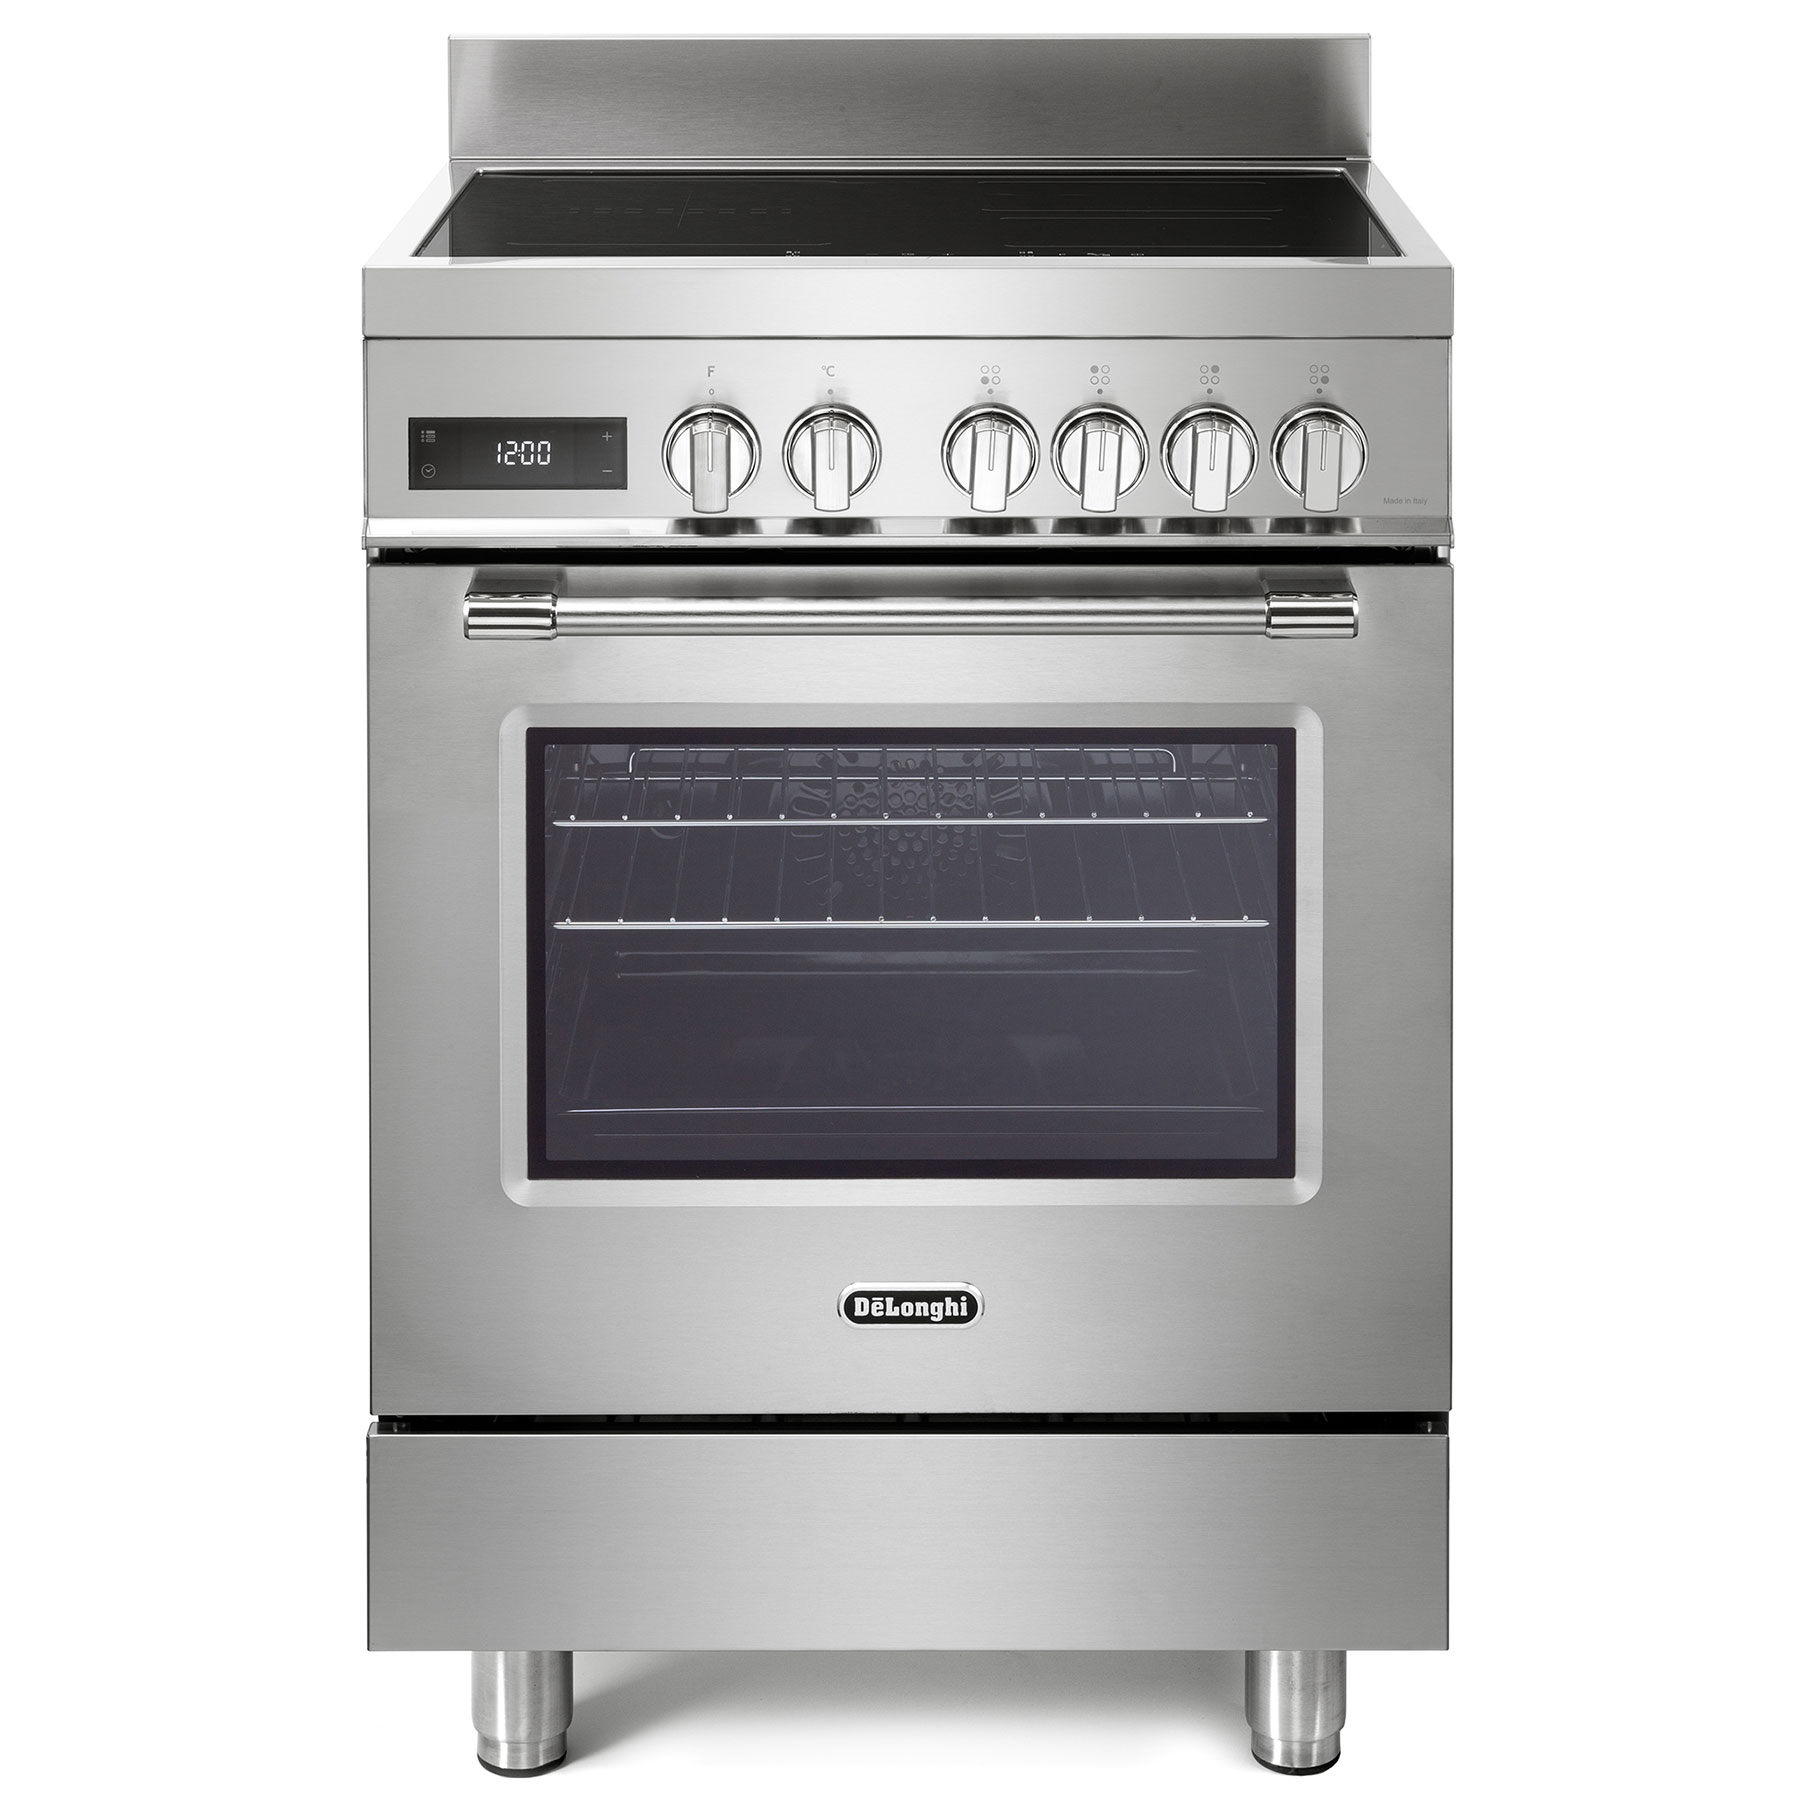 Image of Delonghi DSC626IND 60cm Single Cavity Electric Cooker St St Induction